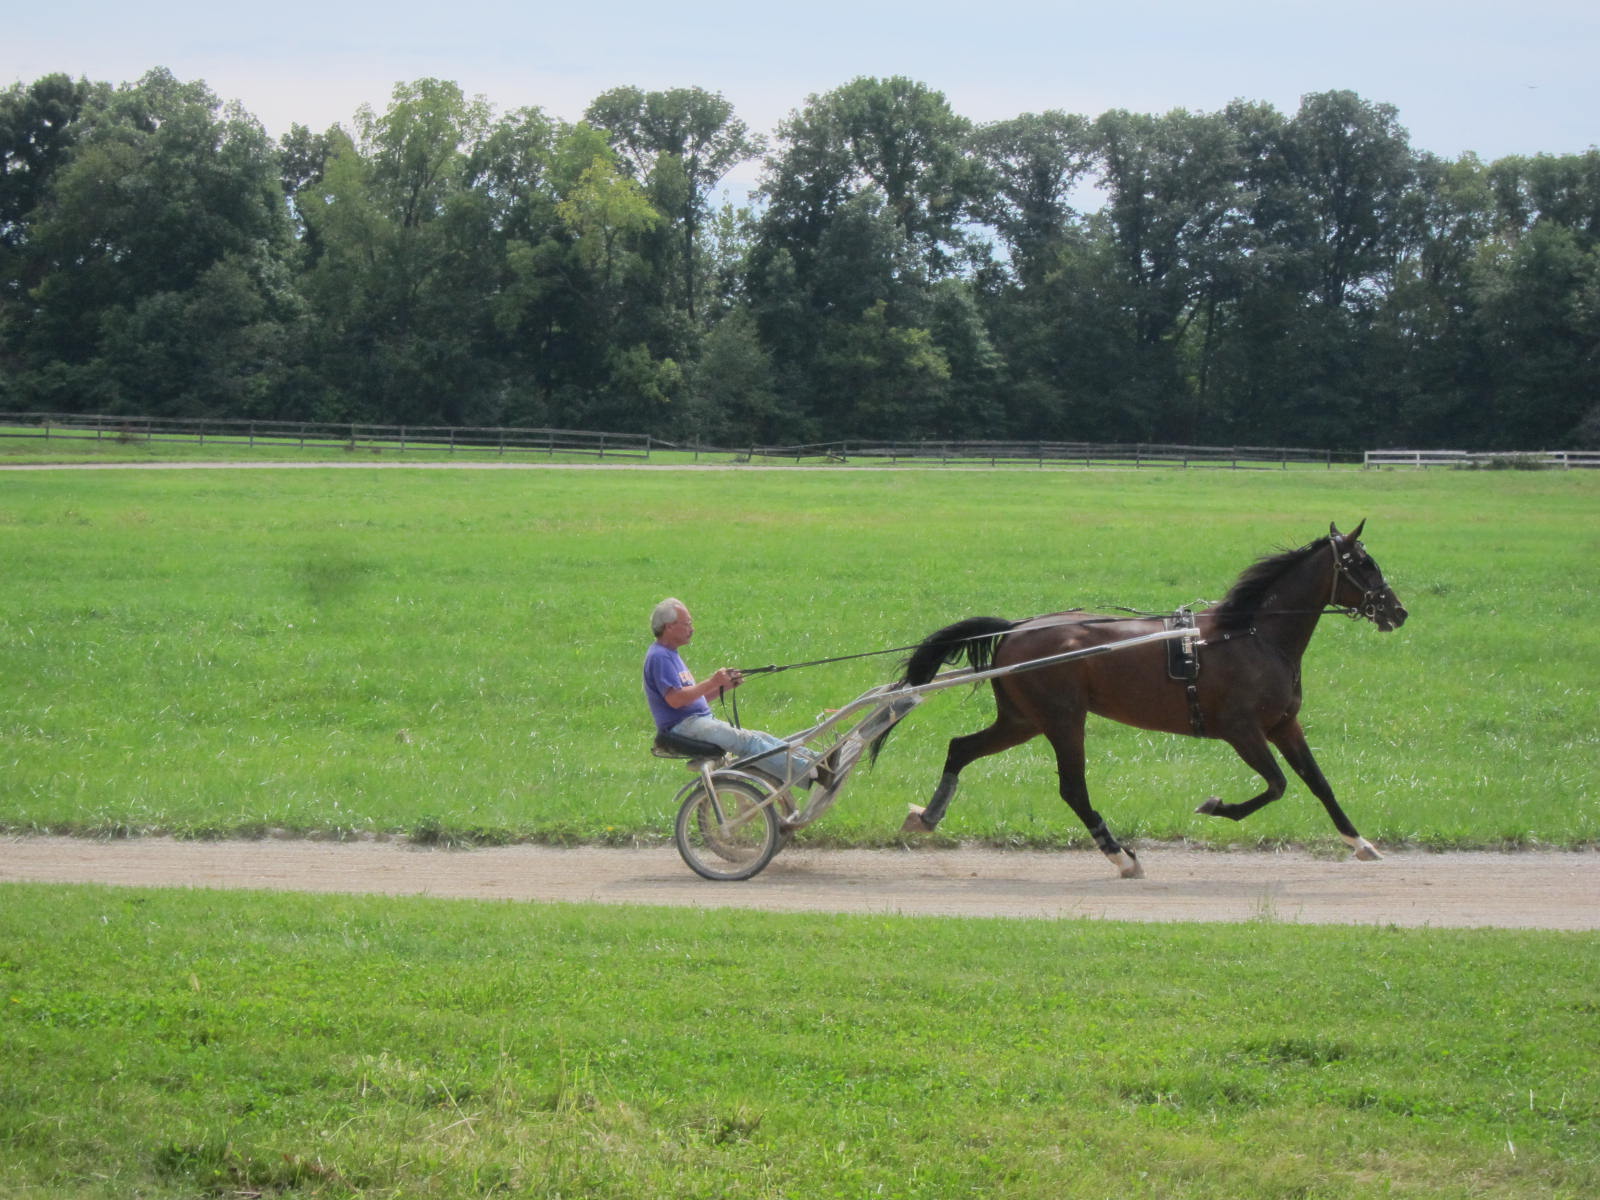 Over the years, many horses were trained at the Crawford Standardbred Farm and raced in Indiana, Ohio, Kentucky, and Illinois.